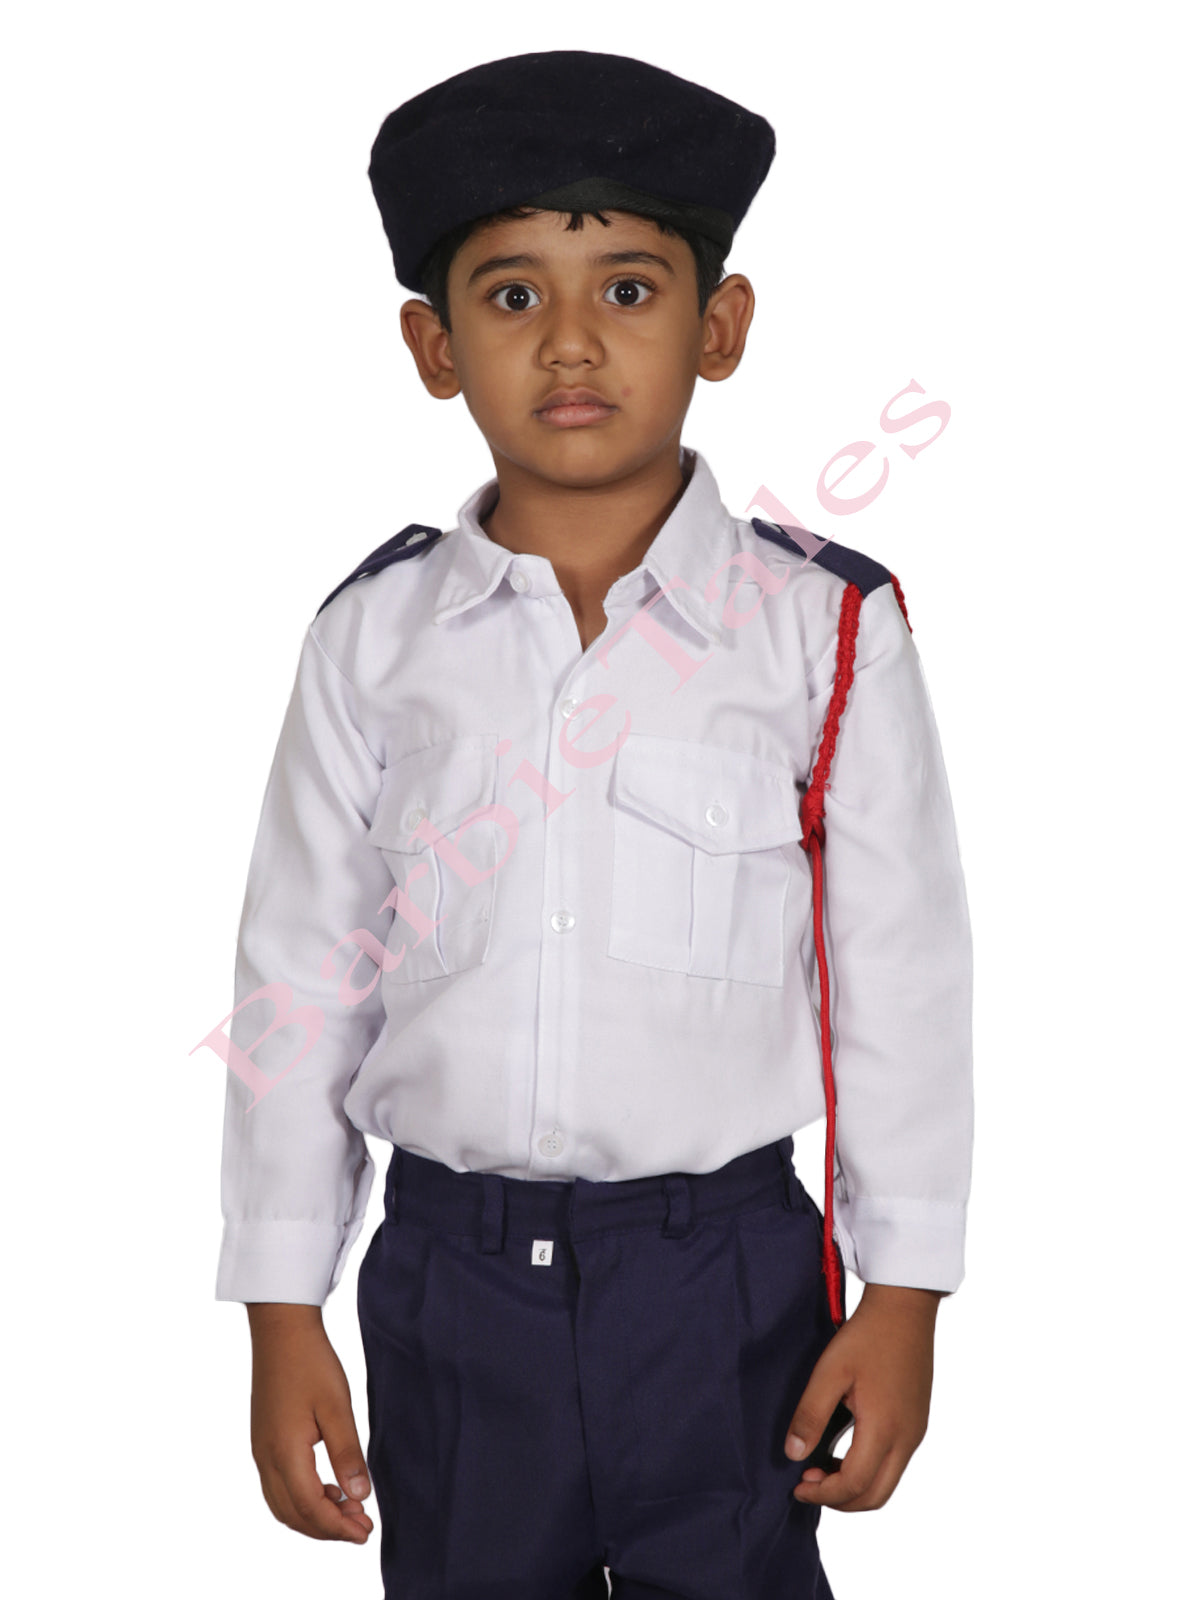 Children Halloween Traffic Special Police Costumes Kids Boys Army Policemen  Cosplay Clothing Sets Party Carnival Police Uniform Q0341R From Aiyueele07,  $24.58 | DHgate.Com